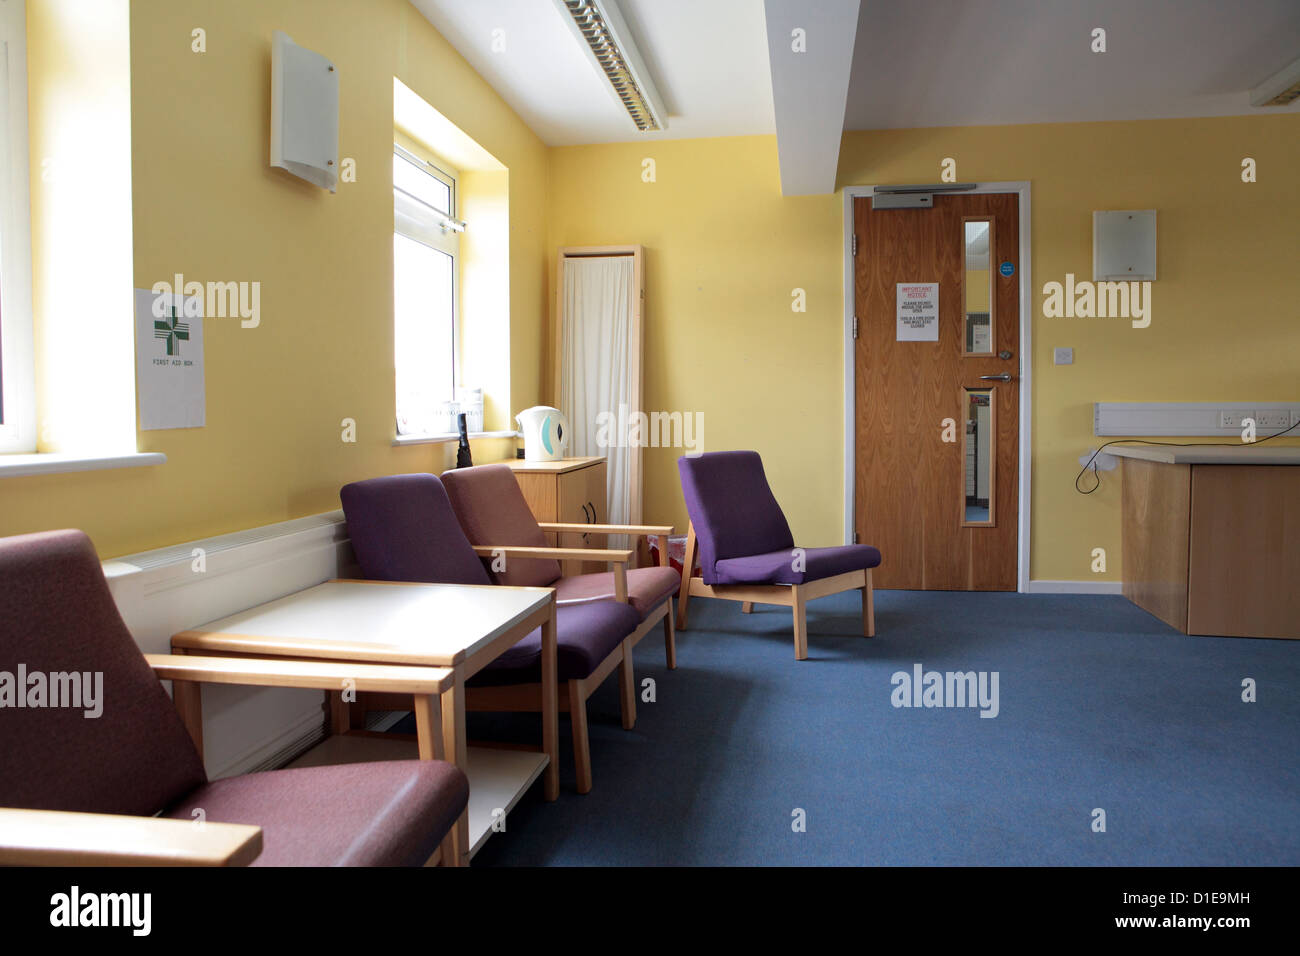 Empty NHS office, waiting room, institution institutional, closed due to austerity cuts, England, UK Stock Photo